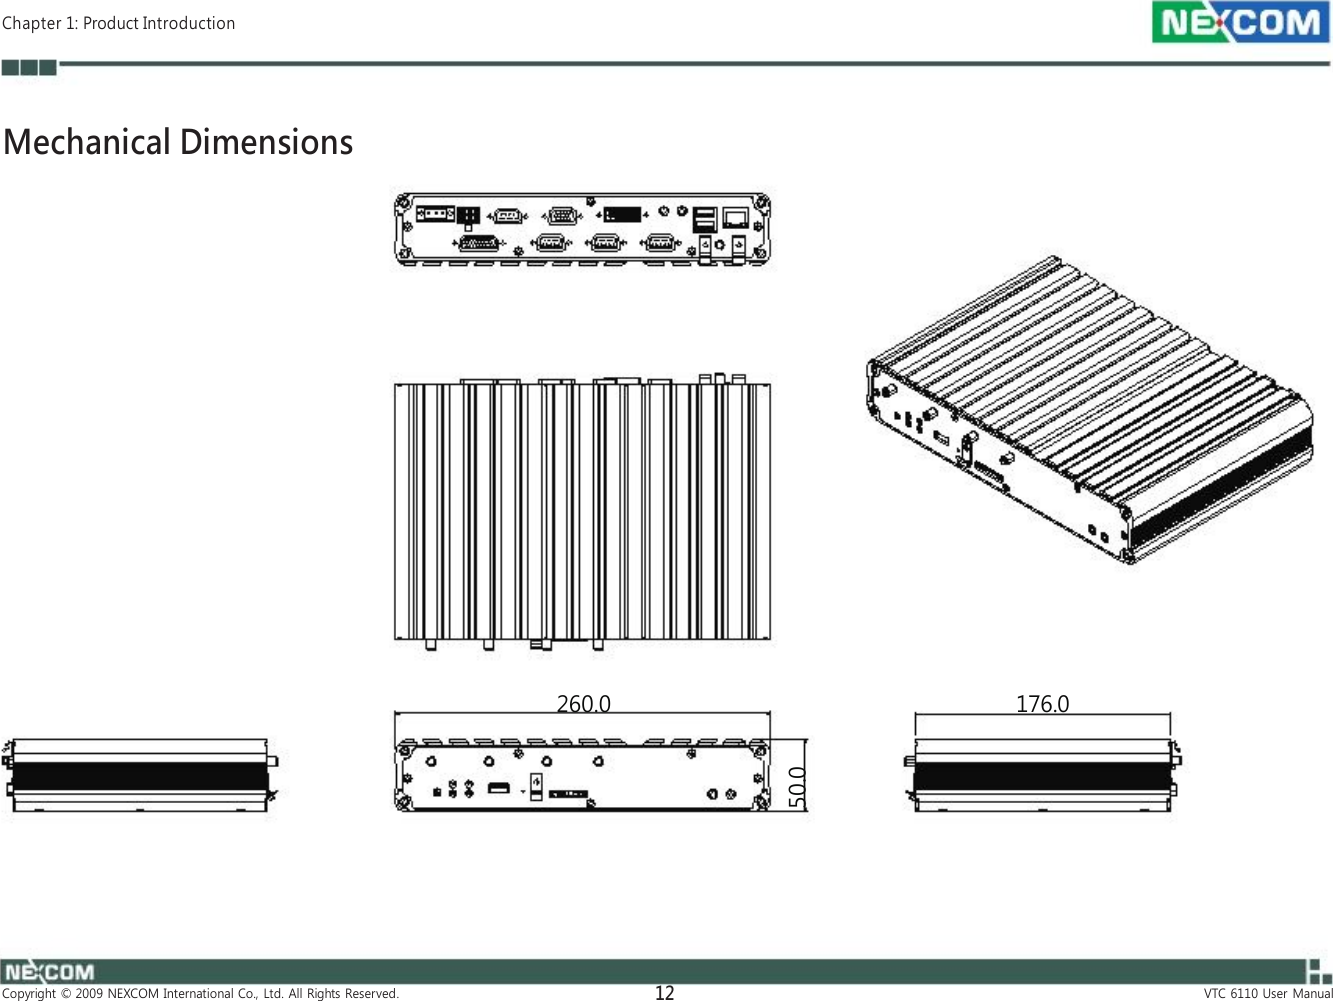 50.0  Chapter 1: Product Introduction    Mechanical Dimensions                     260.0 176.0           Copyright  ©  2009  NEXCOM  International  Co.,  Ltd.  All  Rights  Reserved. 12 VTC  6110  User  Manual 